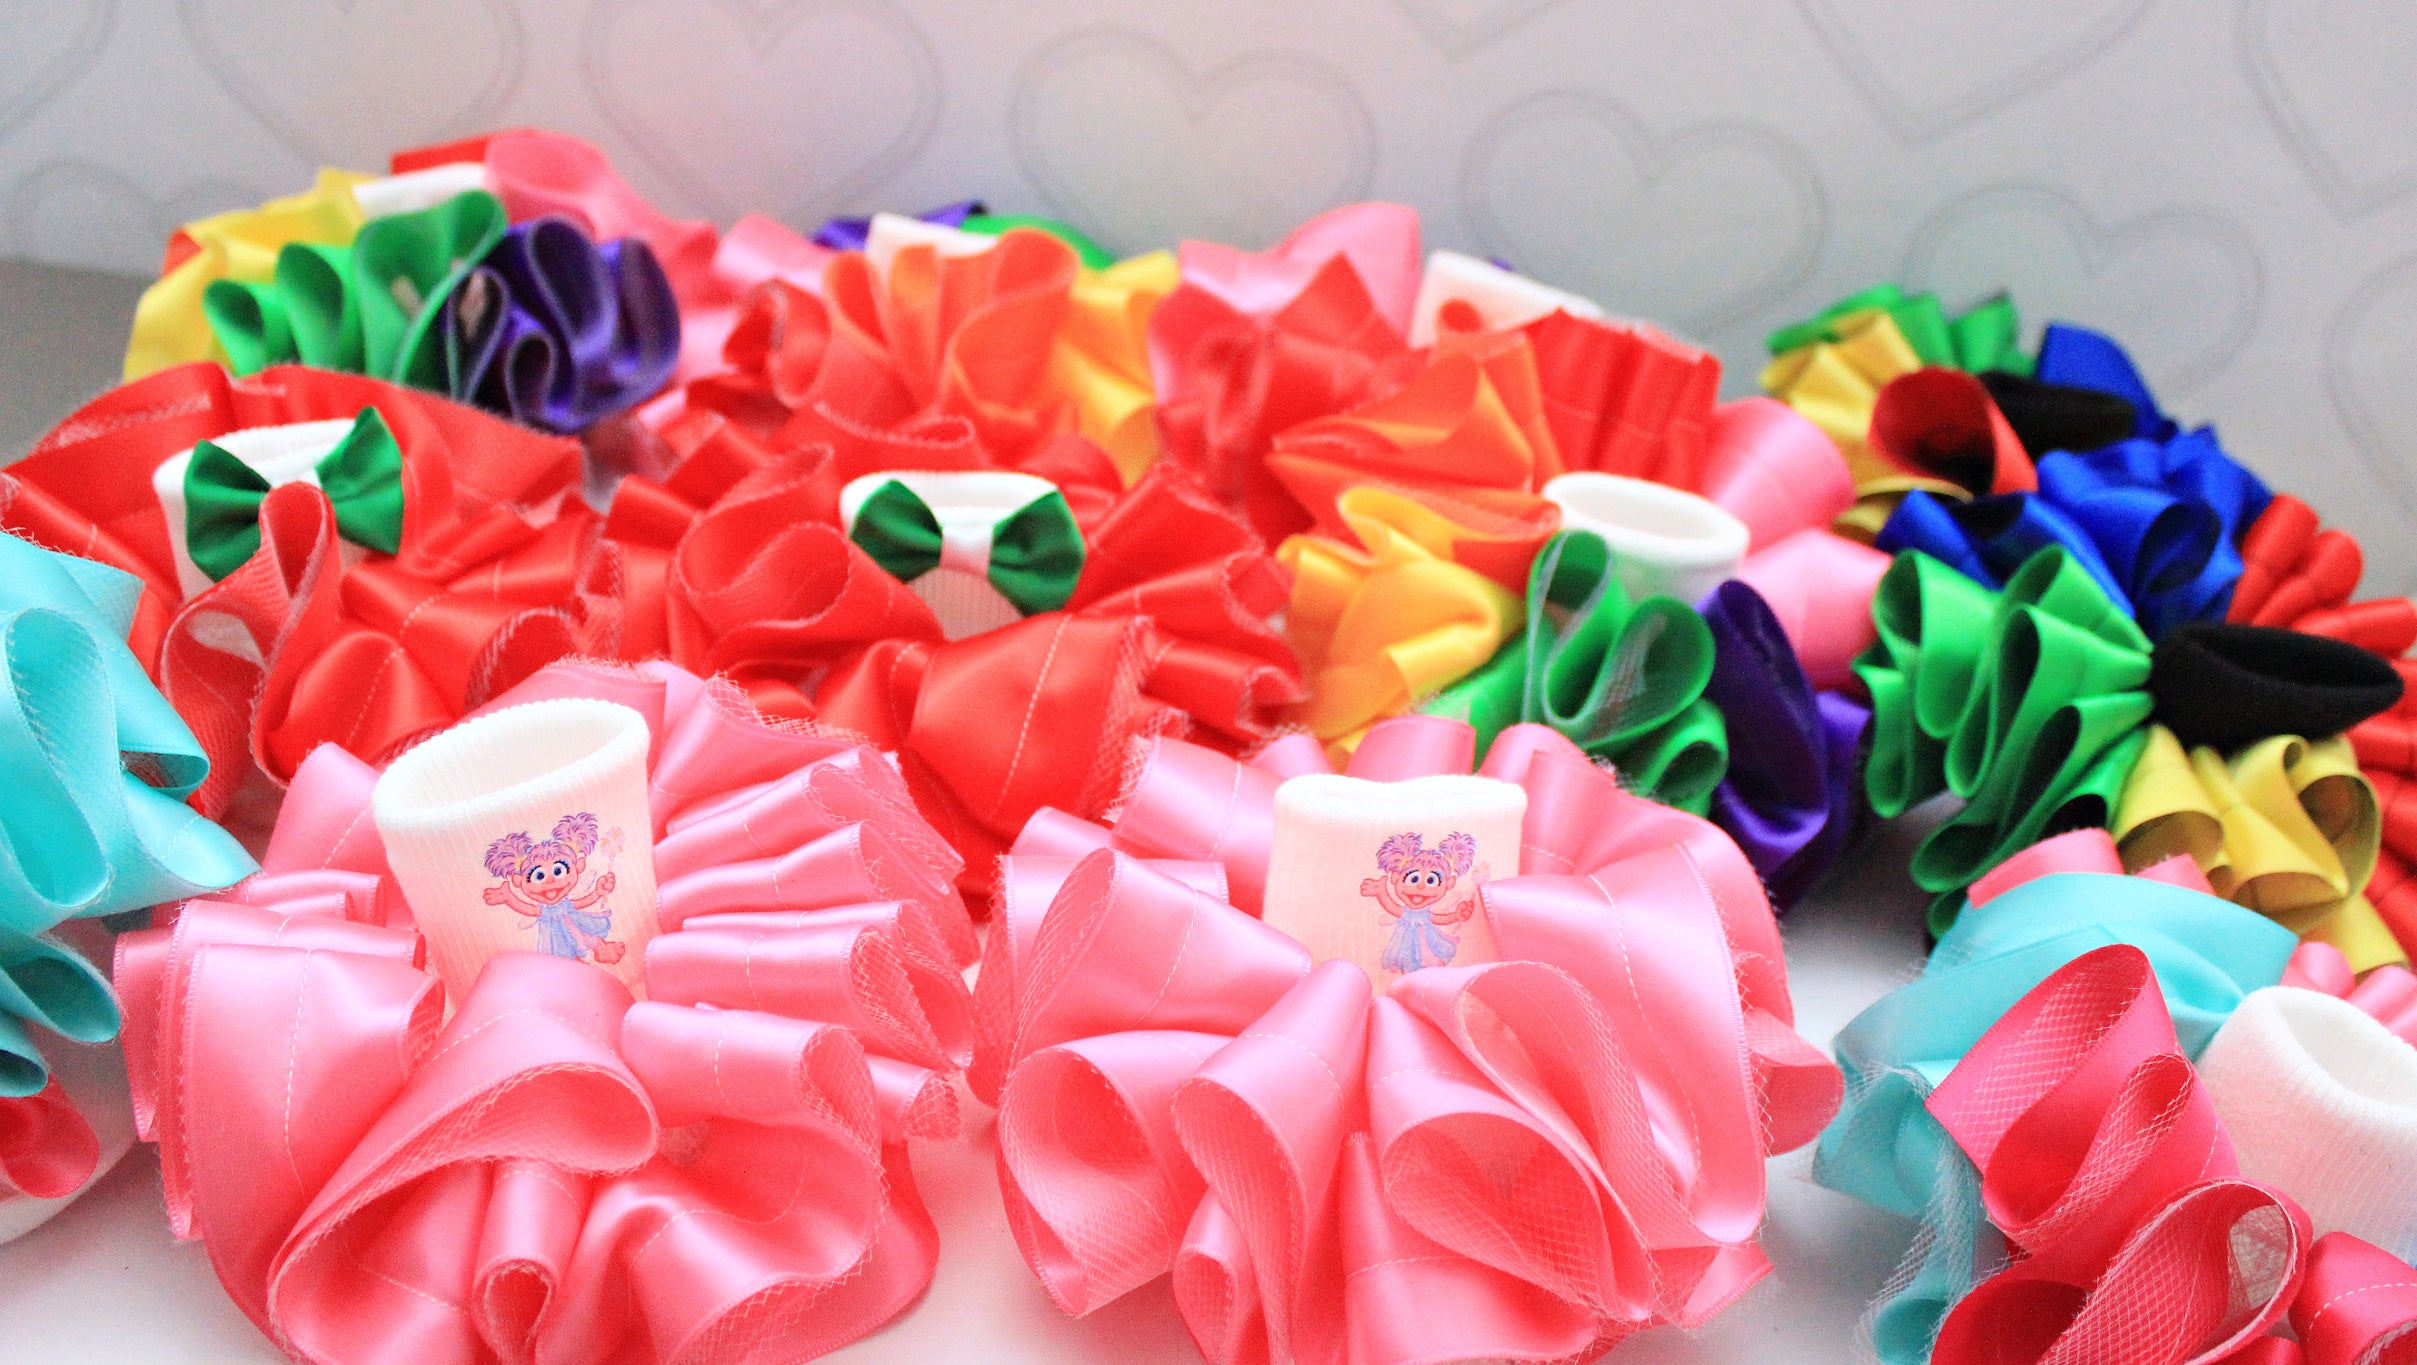 Ribbon Trim Tutu ruffle anklets-Tutu anklets-girls ribbon anklets- ADD ON TO EXISTING ORDER ONLY- NOT SOLD SEPARATE